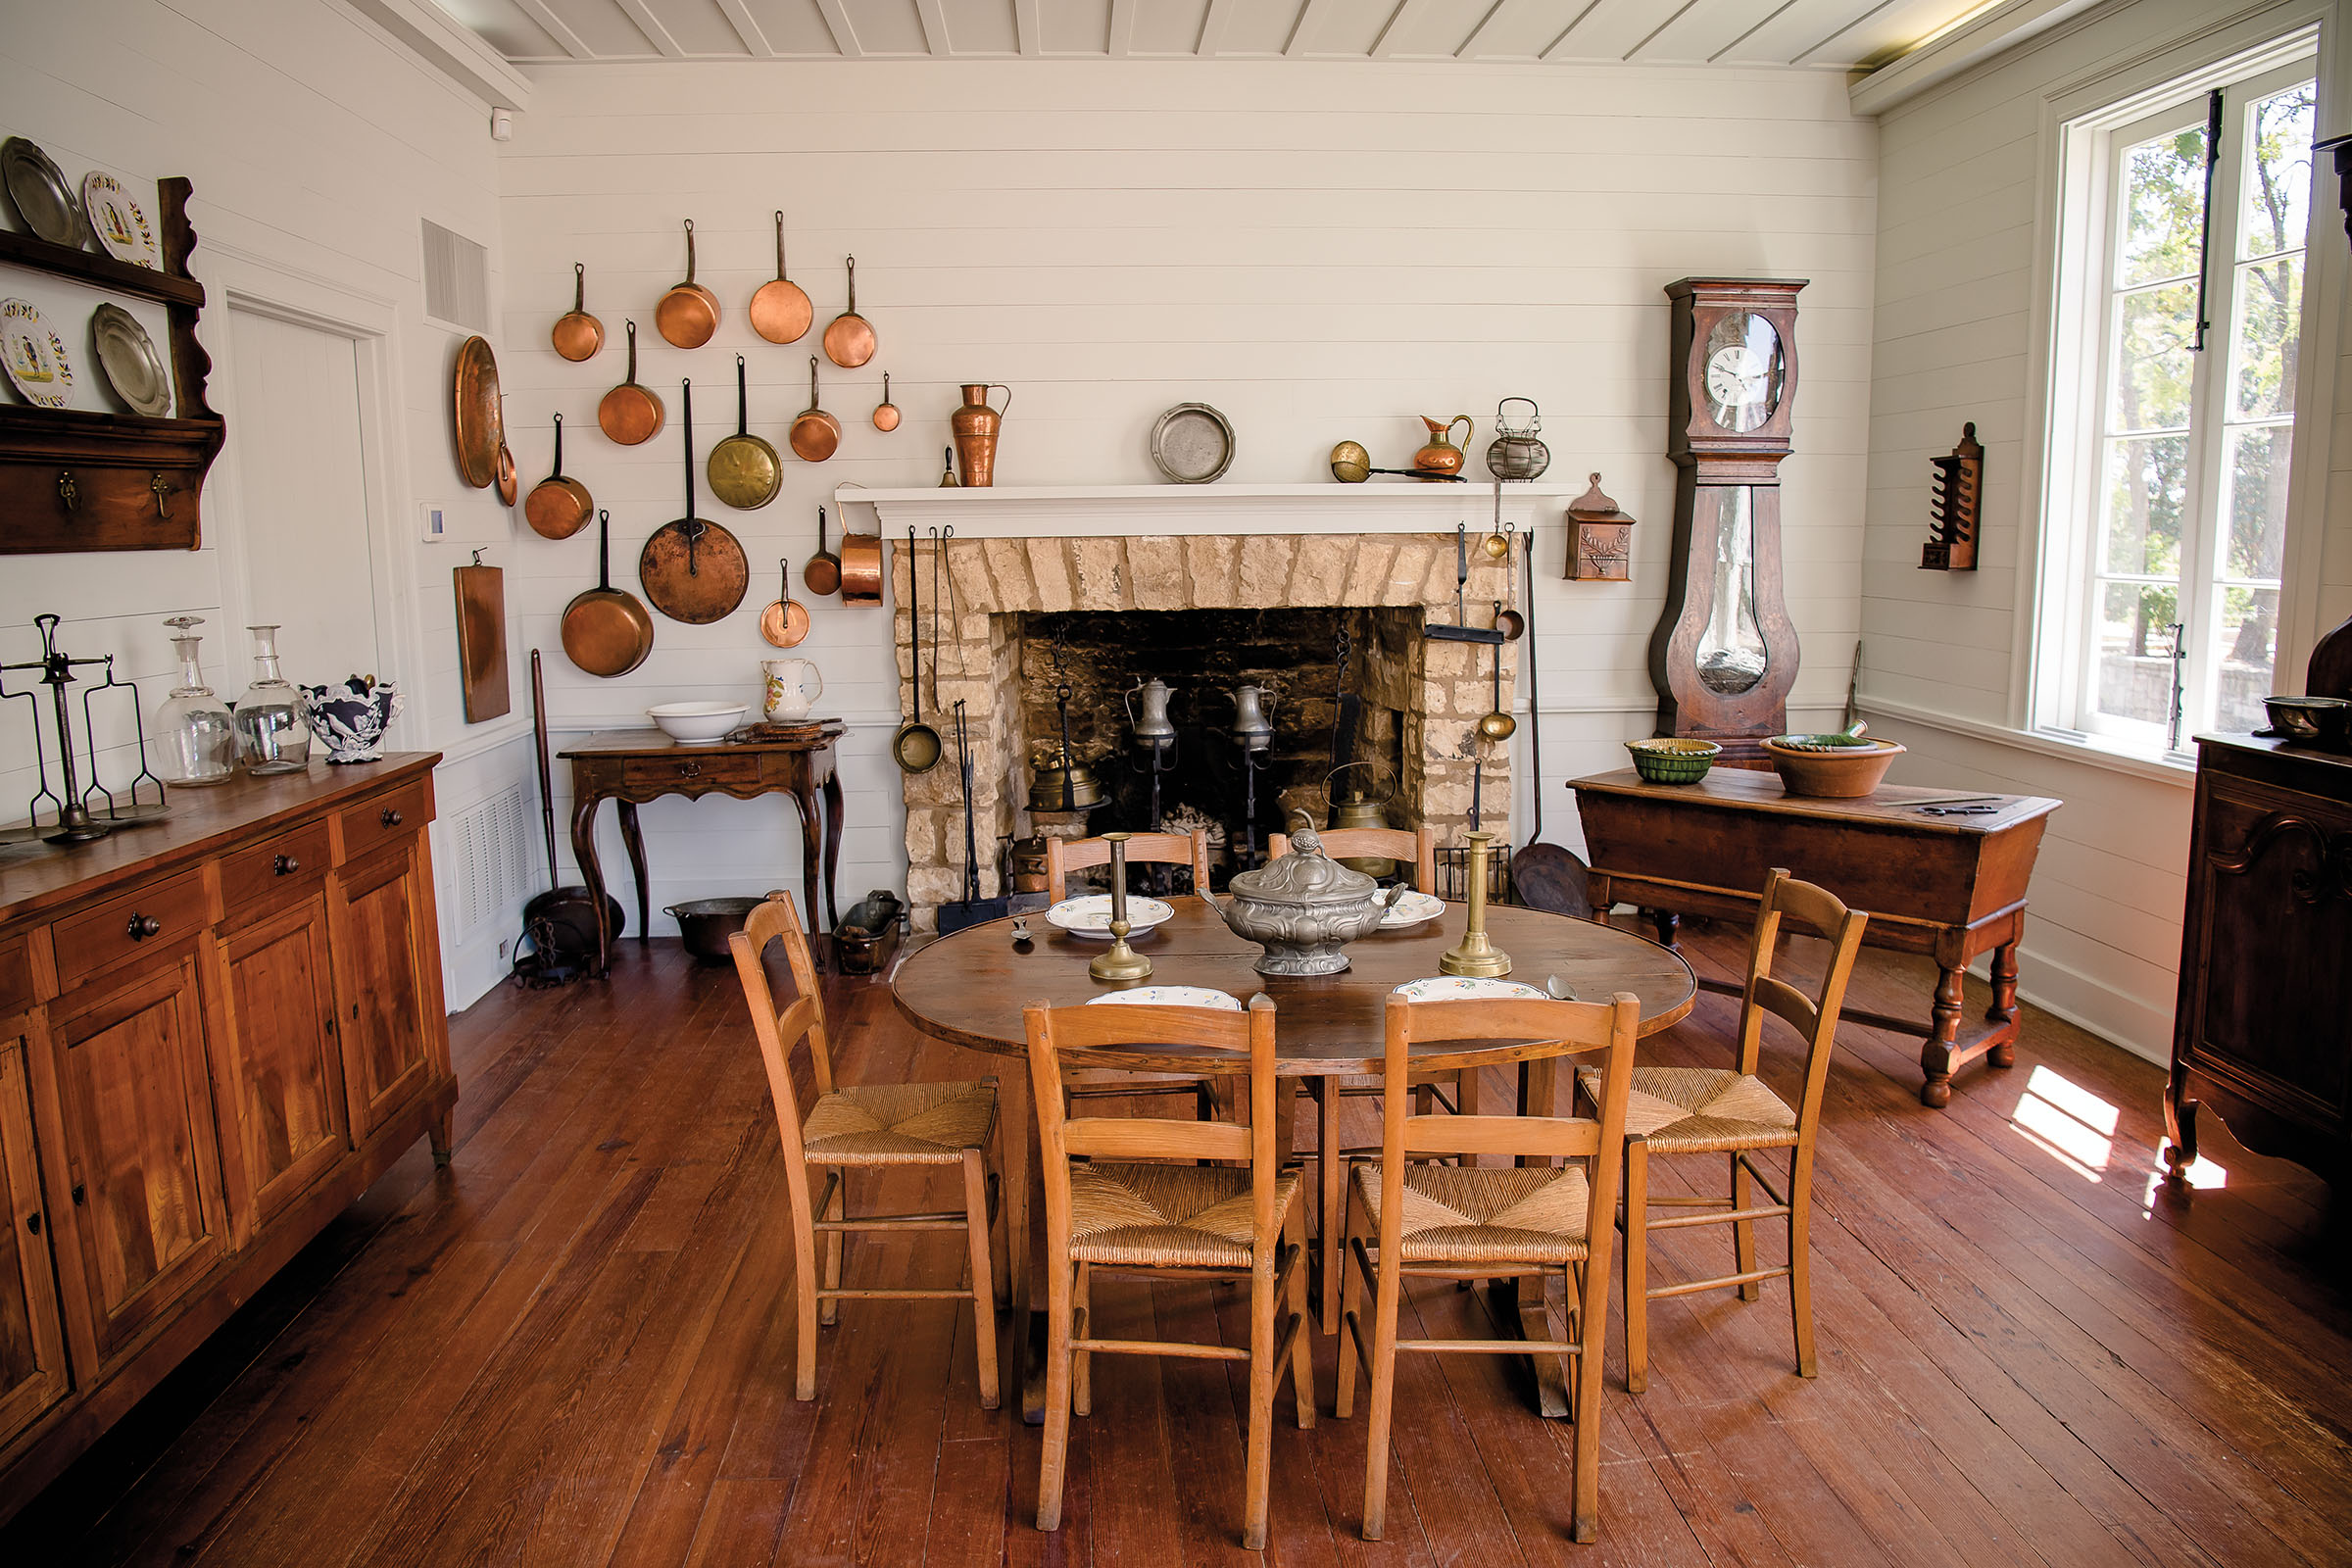 A period-era interior including white walls, copper pots, a large stone fireplace, and a circular wooden dining table with large brass candlesticks